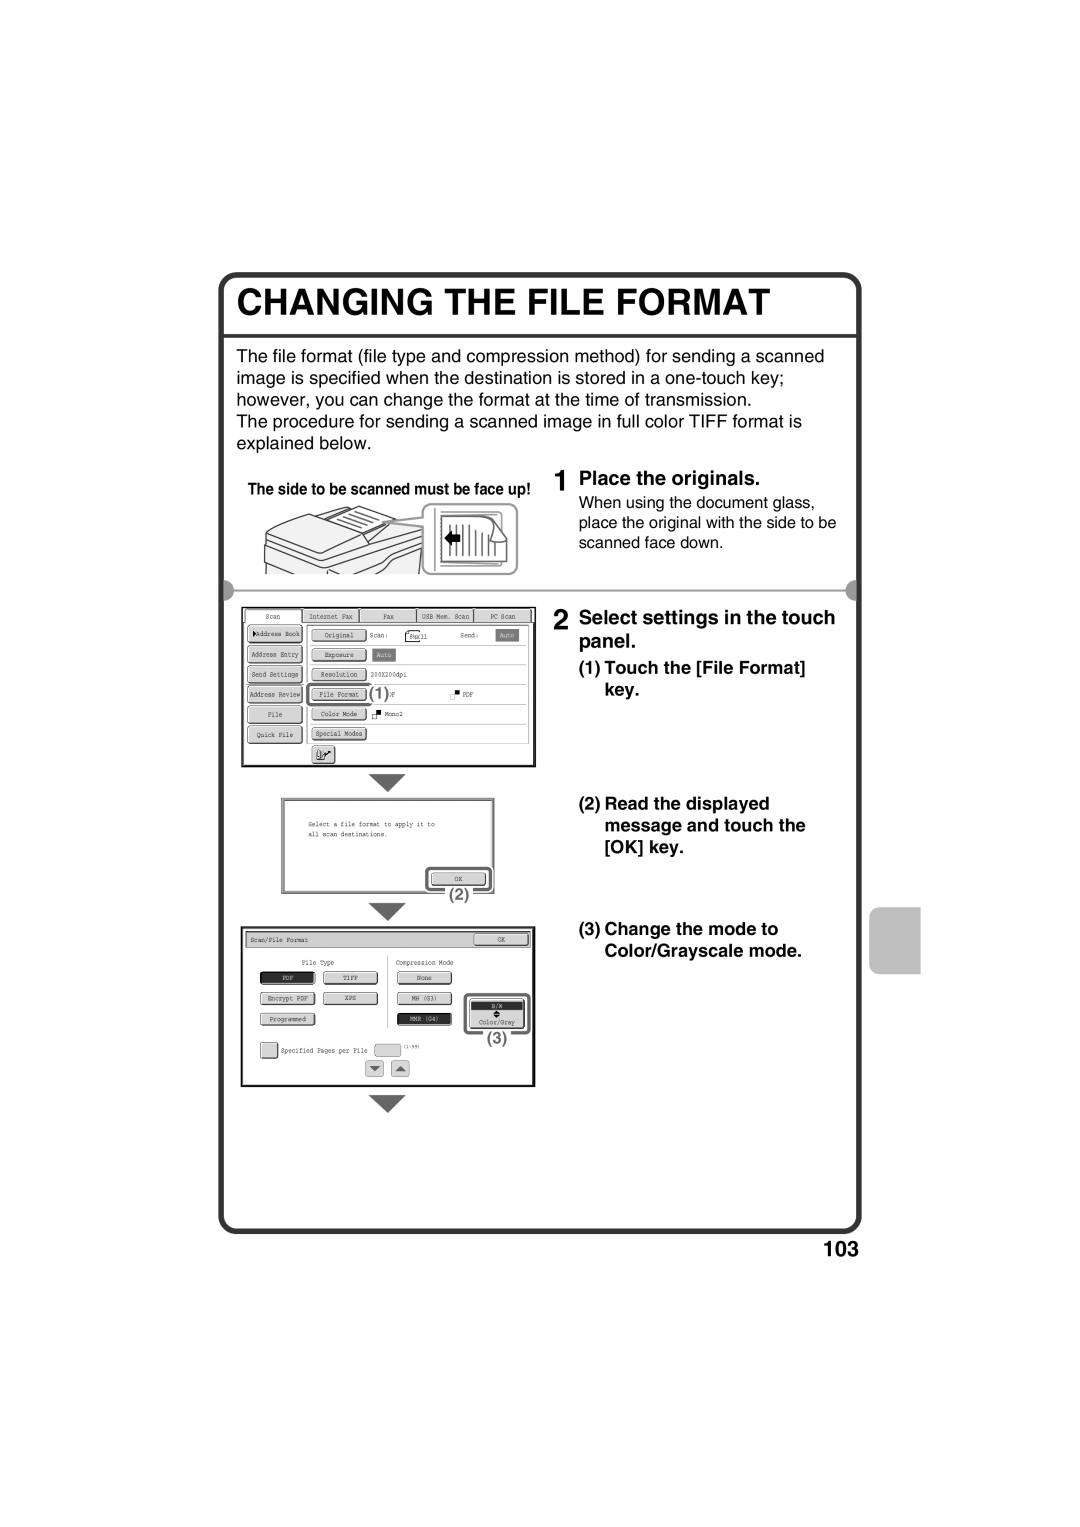 Sharp TINSE4377FCZZ, MX-B401 Changing The File Format, Touch the File Format key, Change the mode to Color/Grayscale mode 